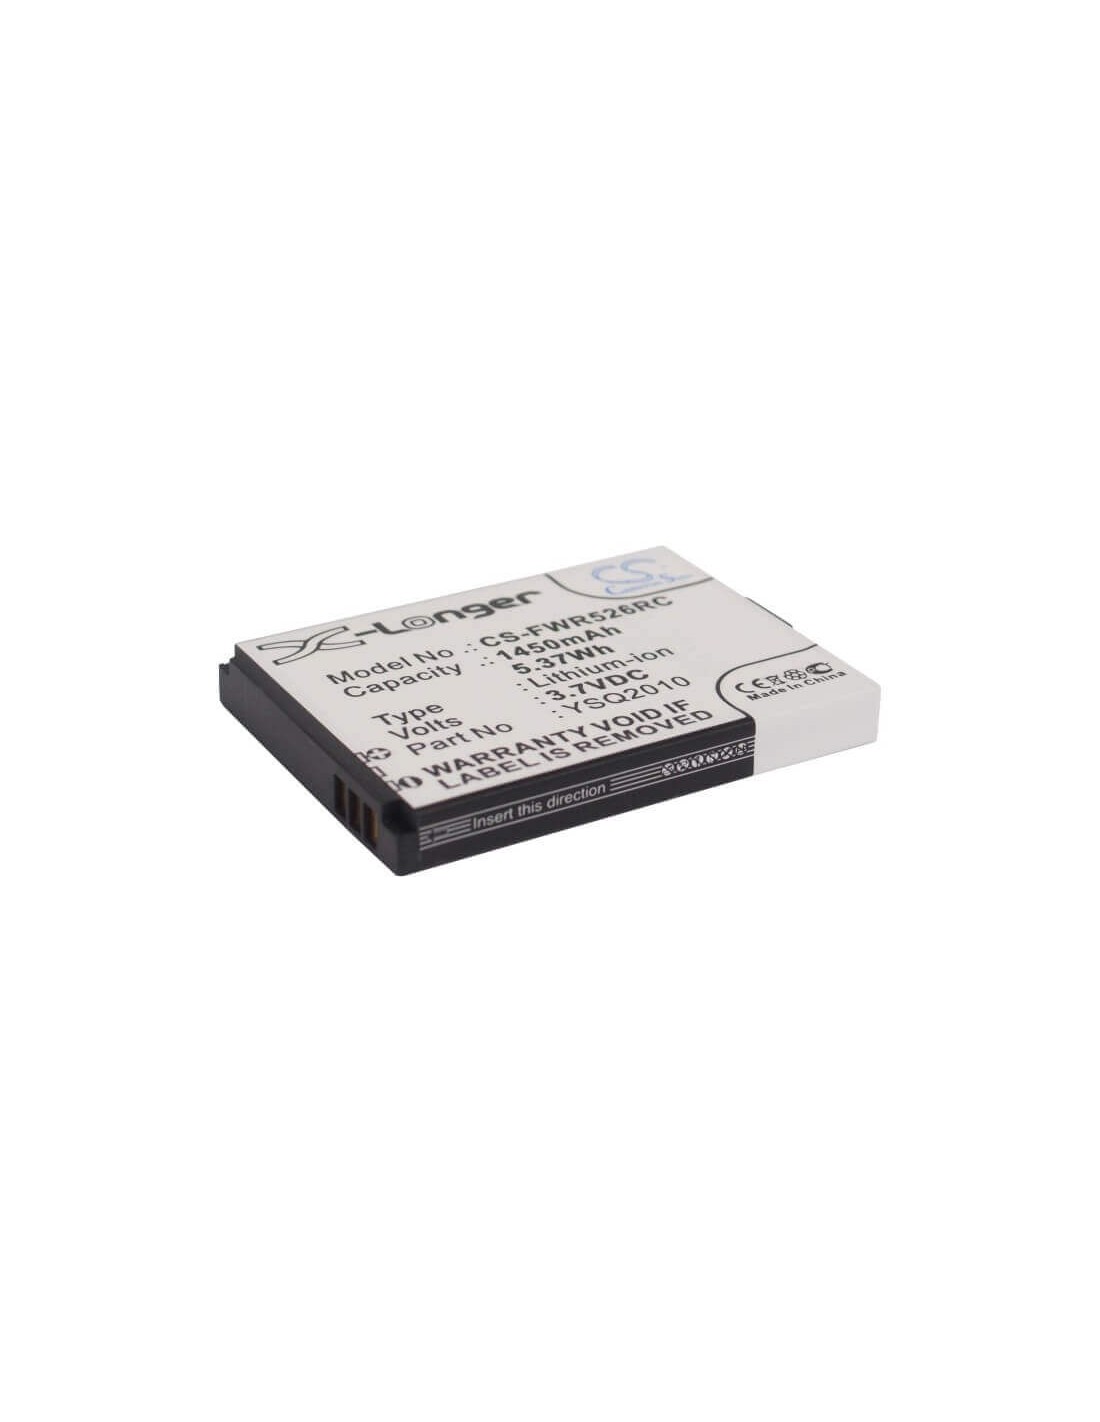 Battery for Franklin Wireless R526, R526a, R536 3.7V, 1450mAh - 5.37Wh